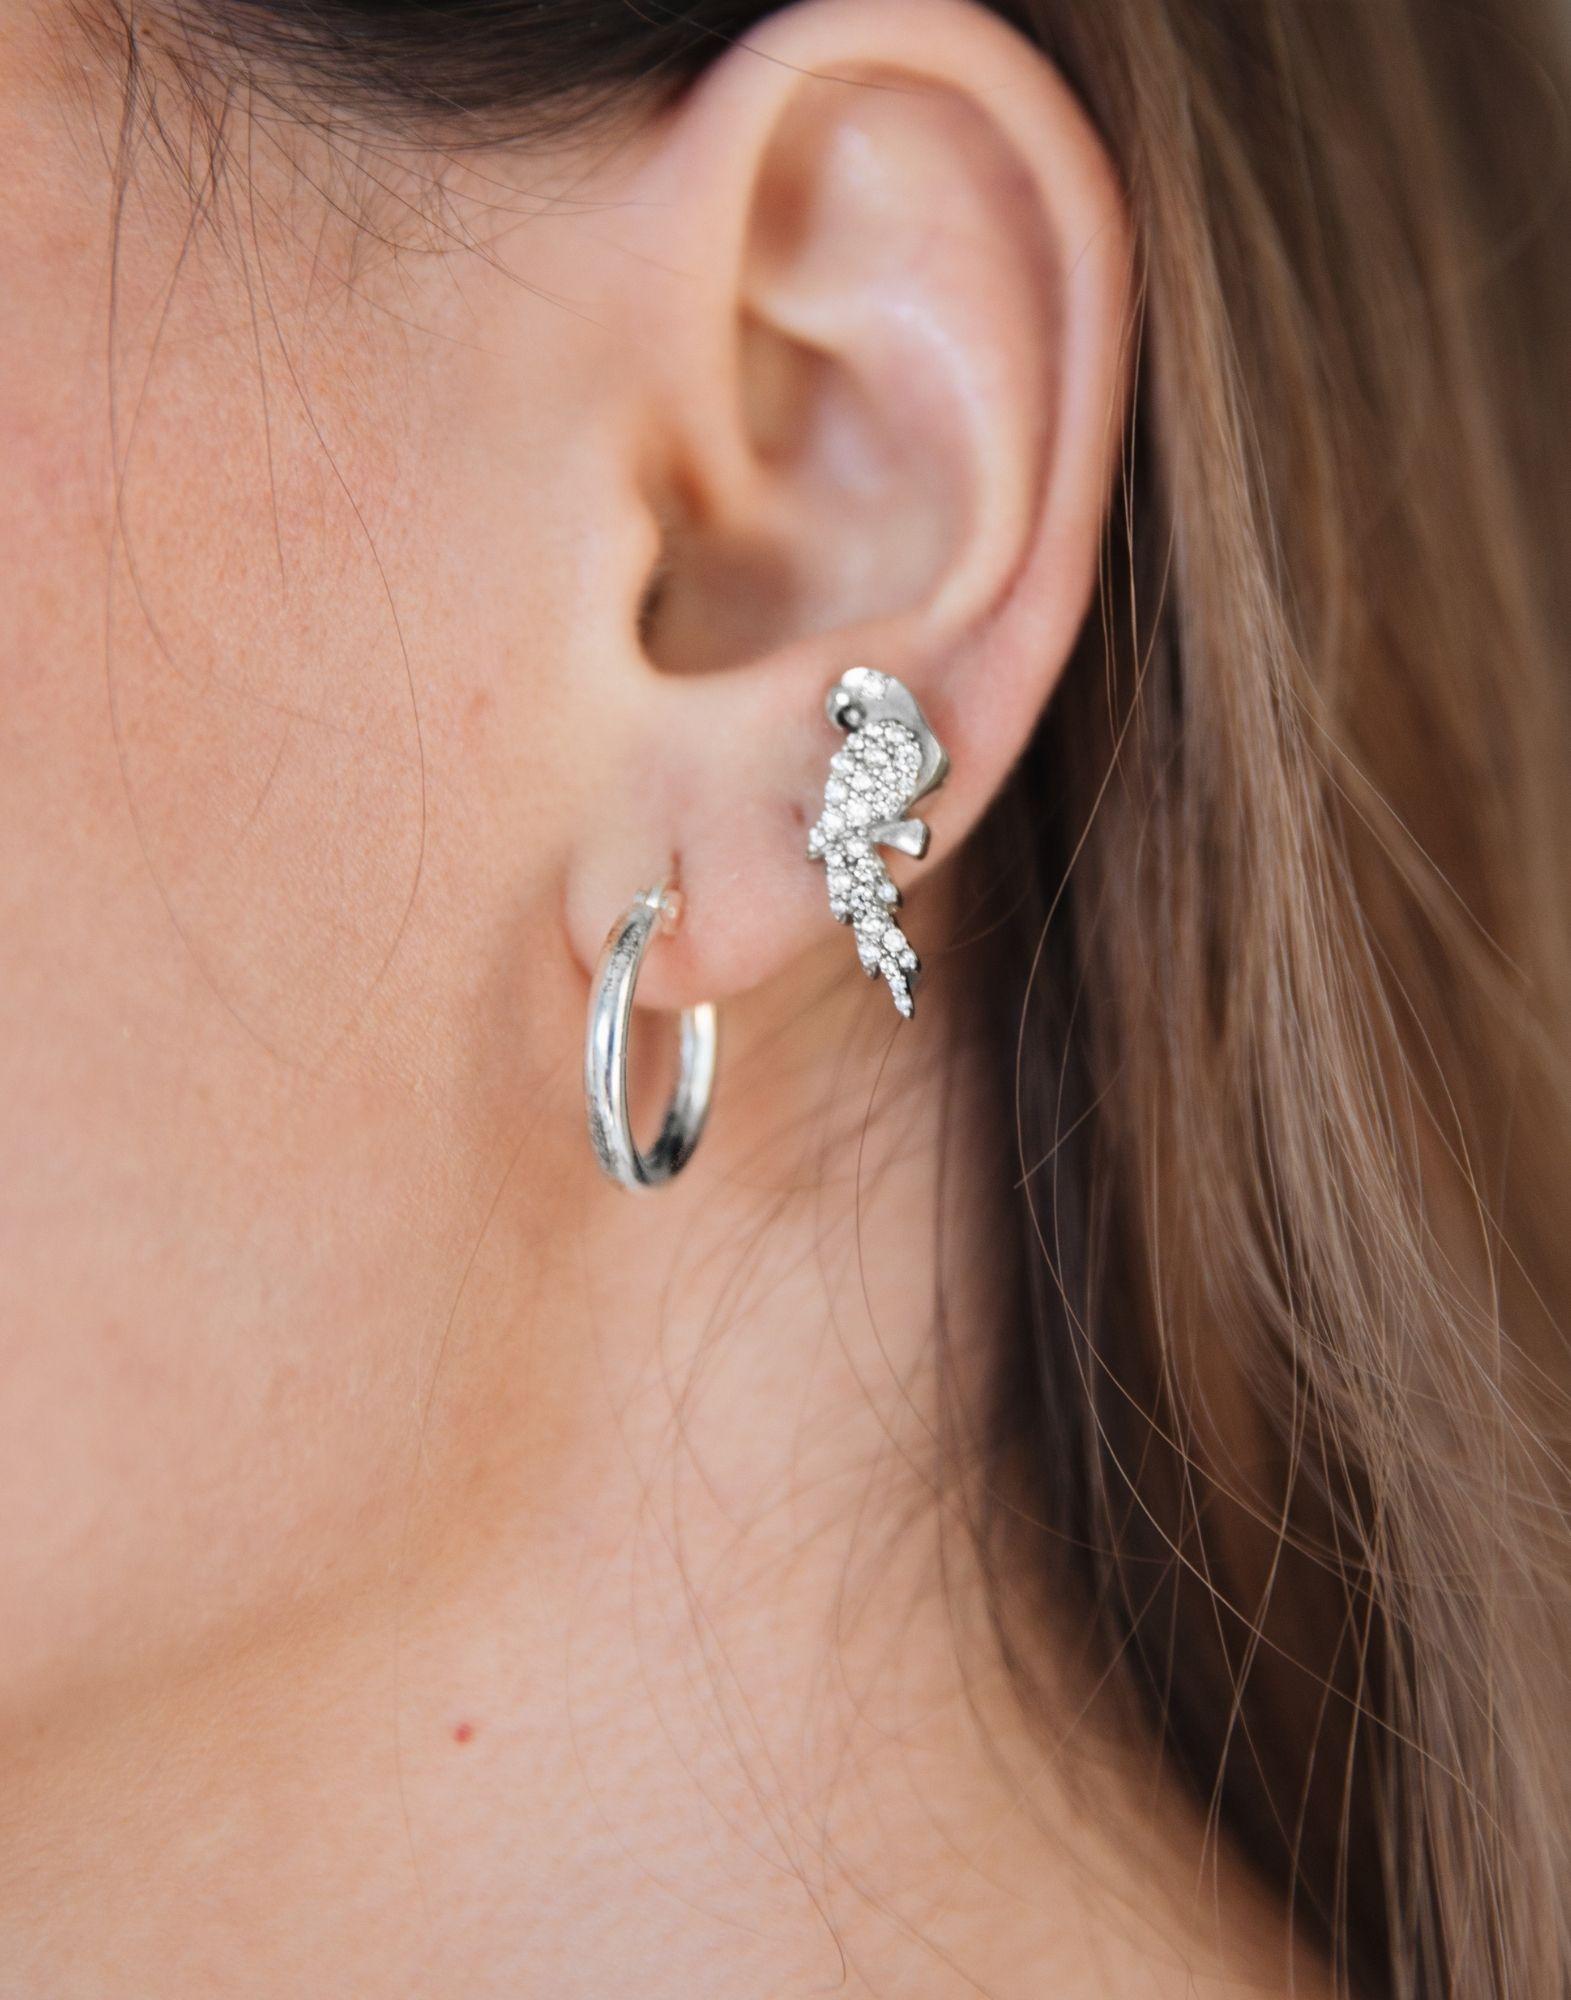 Thais Bernardes takes the iconic figure of the Brazilian parrot, a symbol of creativity and freedom, and reinterprets it into a unique pair of earrings embellished with stone-studded parrots.

It is part of the Brazilian Soul collection, which aims